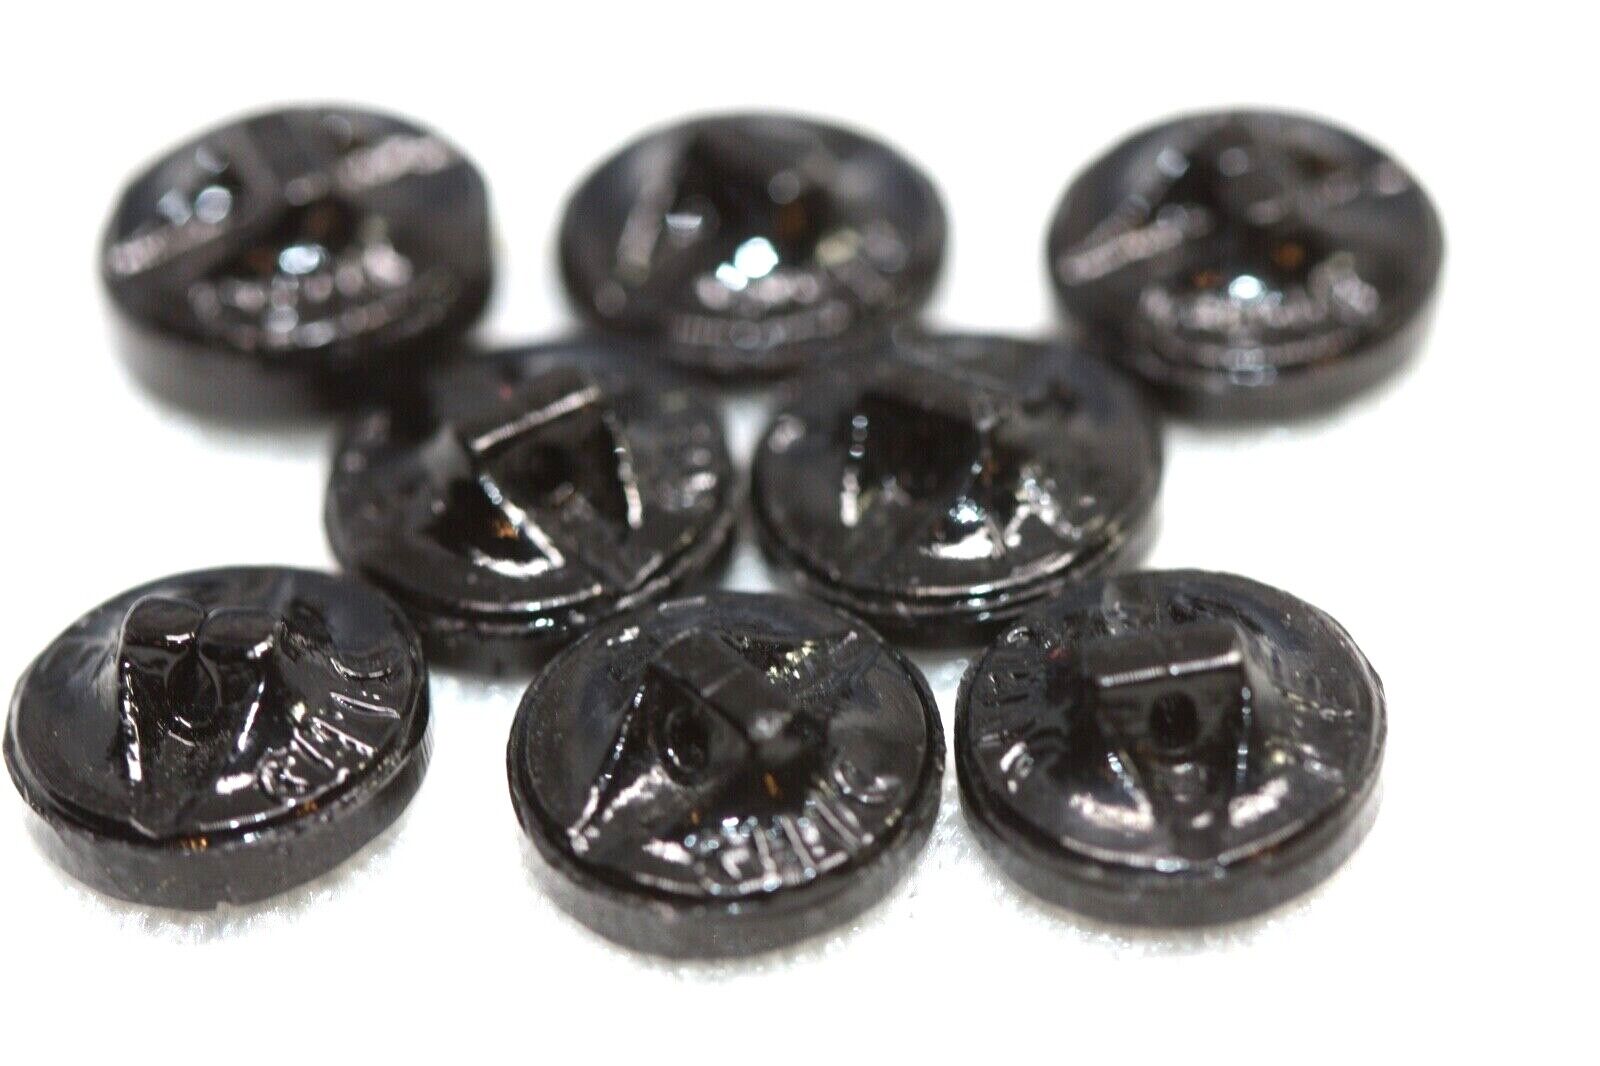 8 Vintage Le Chic Black Glass Honeycomb Buttons Round Faceted Jet Mourning Без бренда - фотография #2